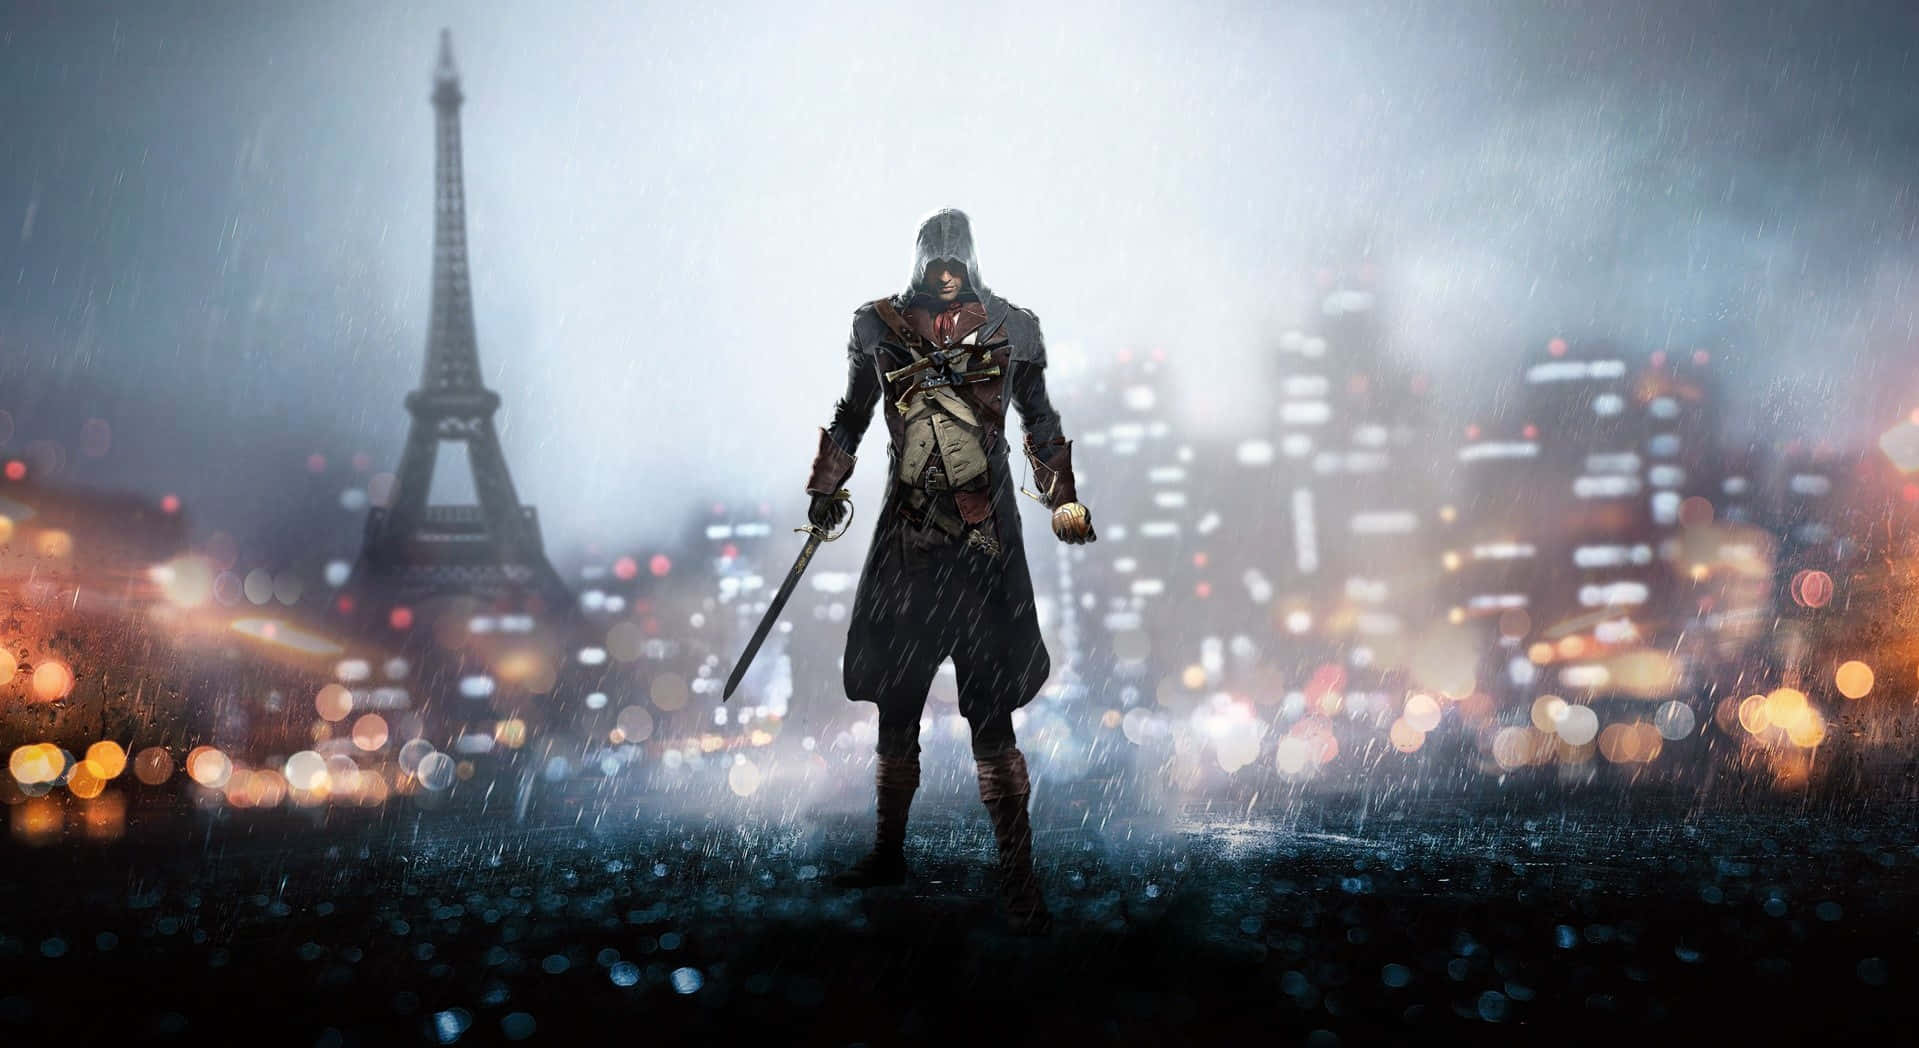 Arno Dorian gracefully leaping in the streets of Paris, Assassin's Creed Unity. Wallpaper